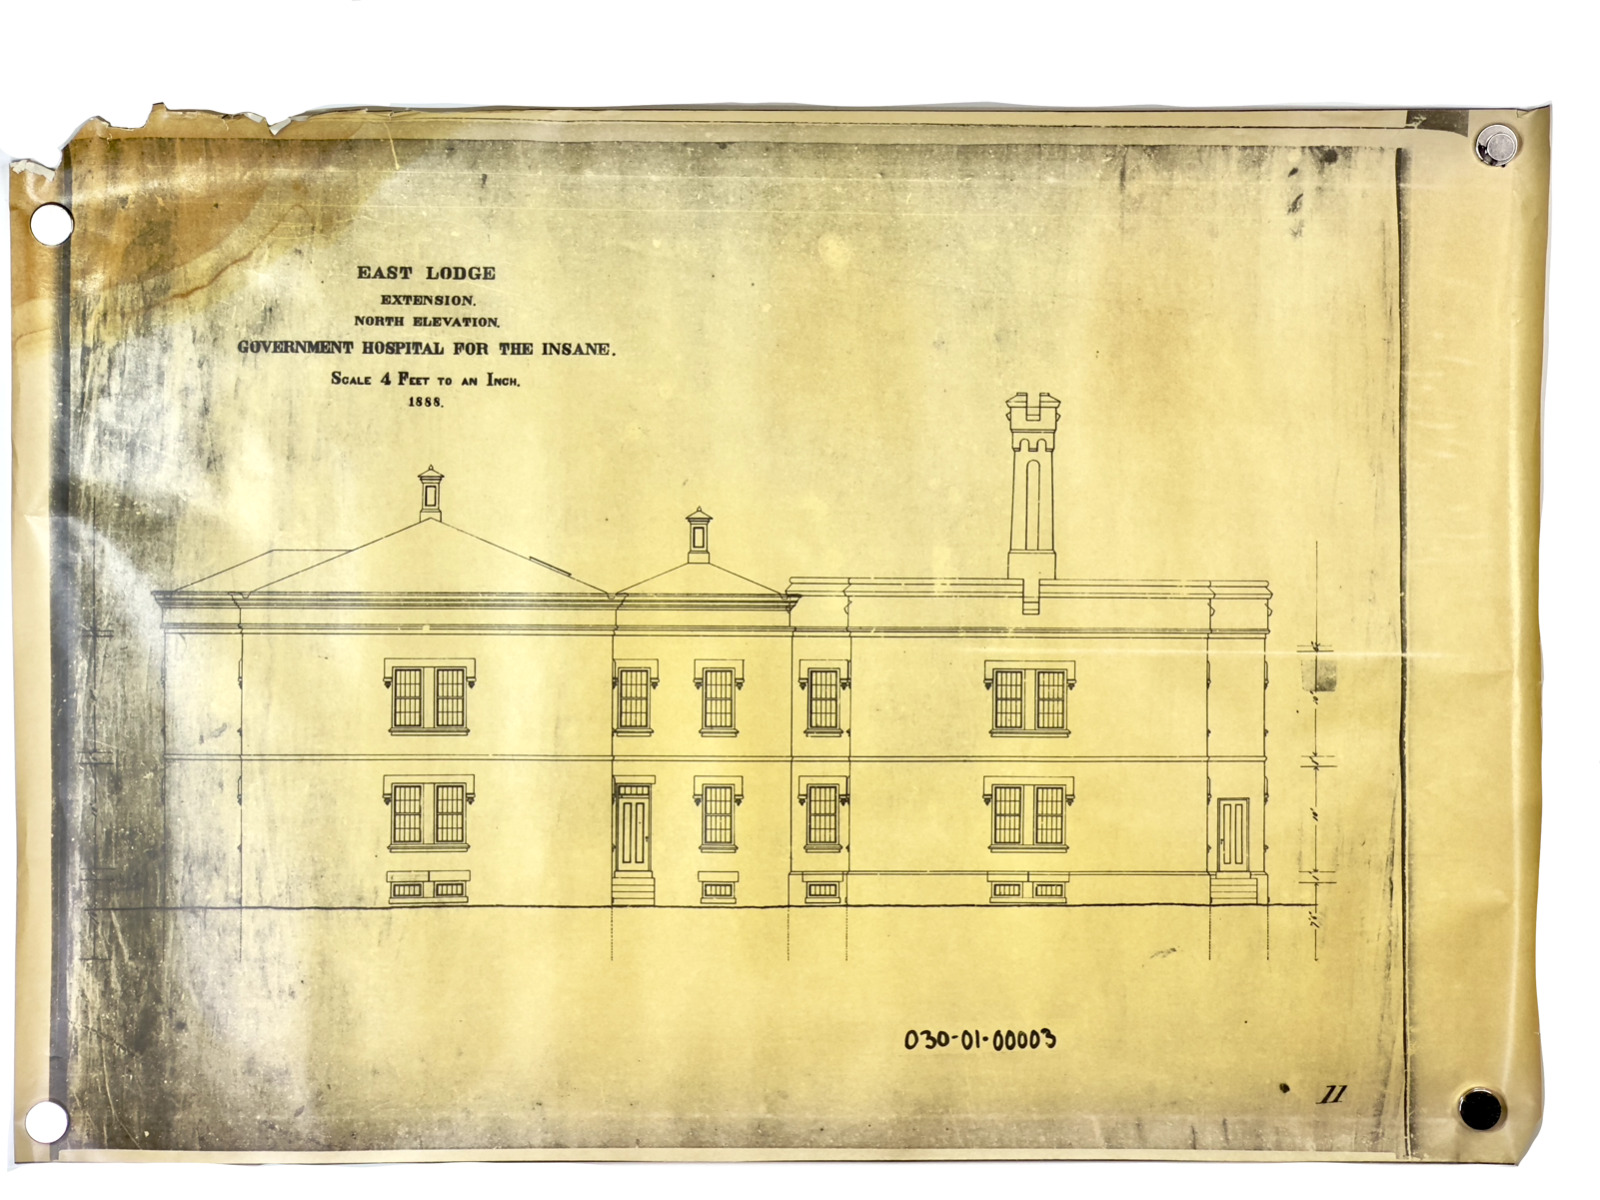 1888 Architectural Drawing- Government Hospital For The Insane- Washington D.C